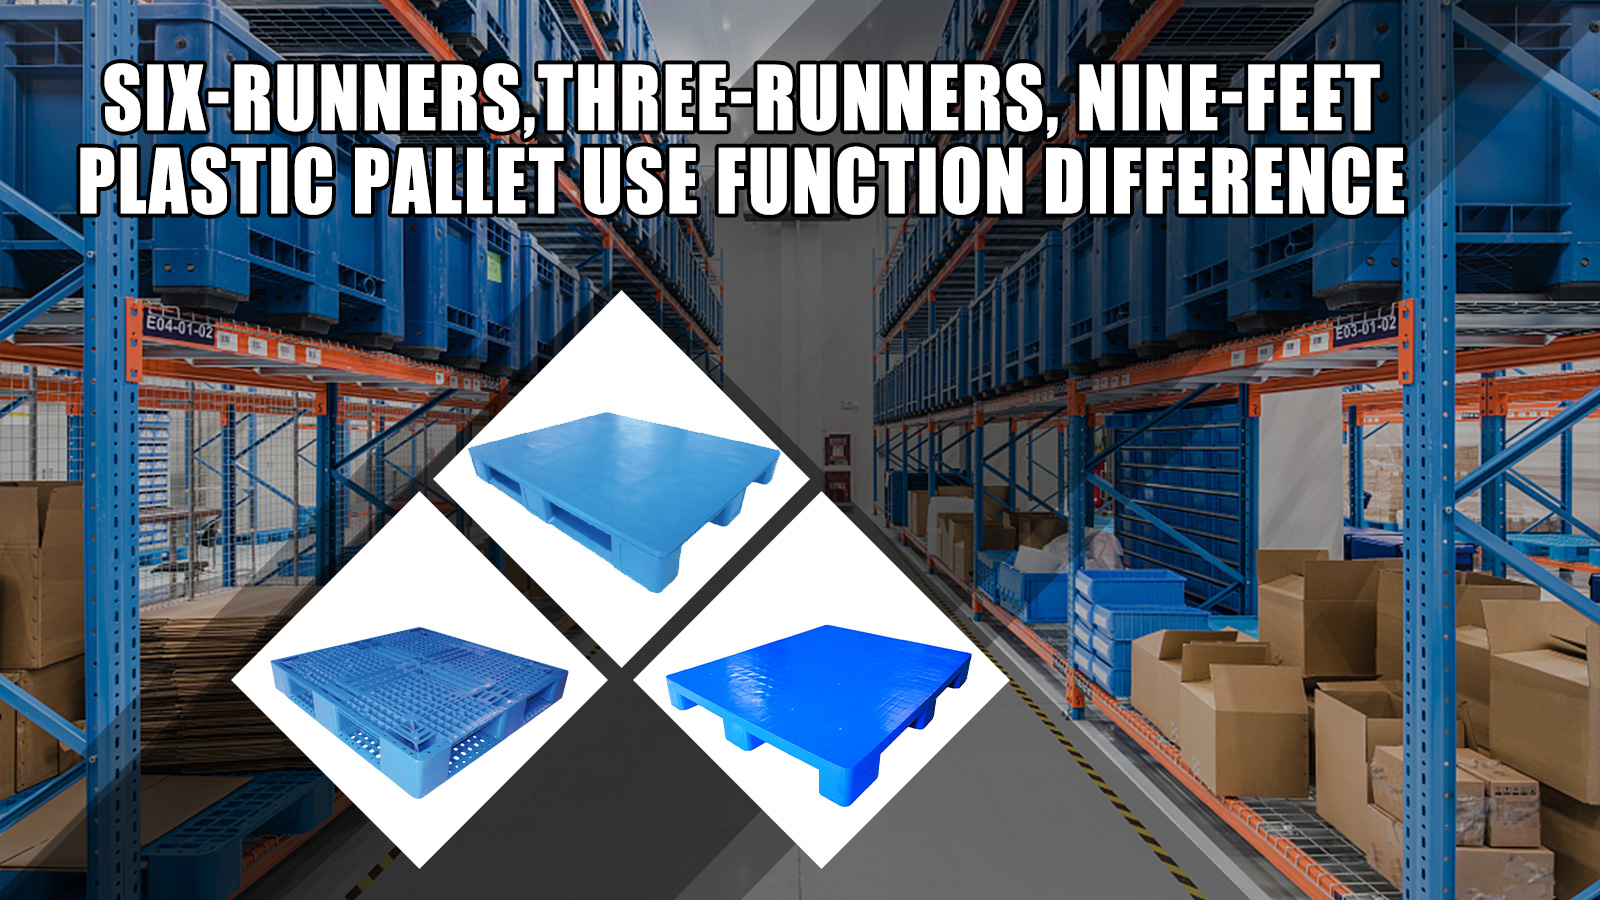 Six-runners,three-runners, nine-feet plastic pallet use function difference